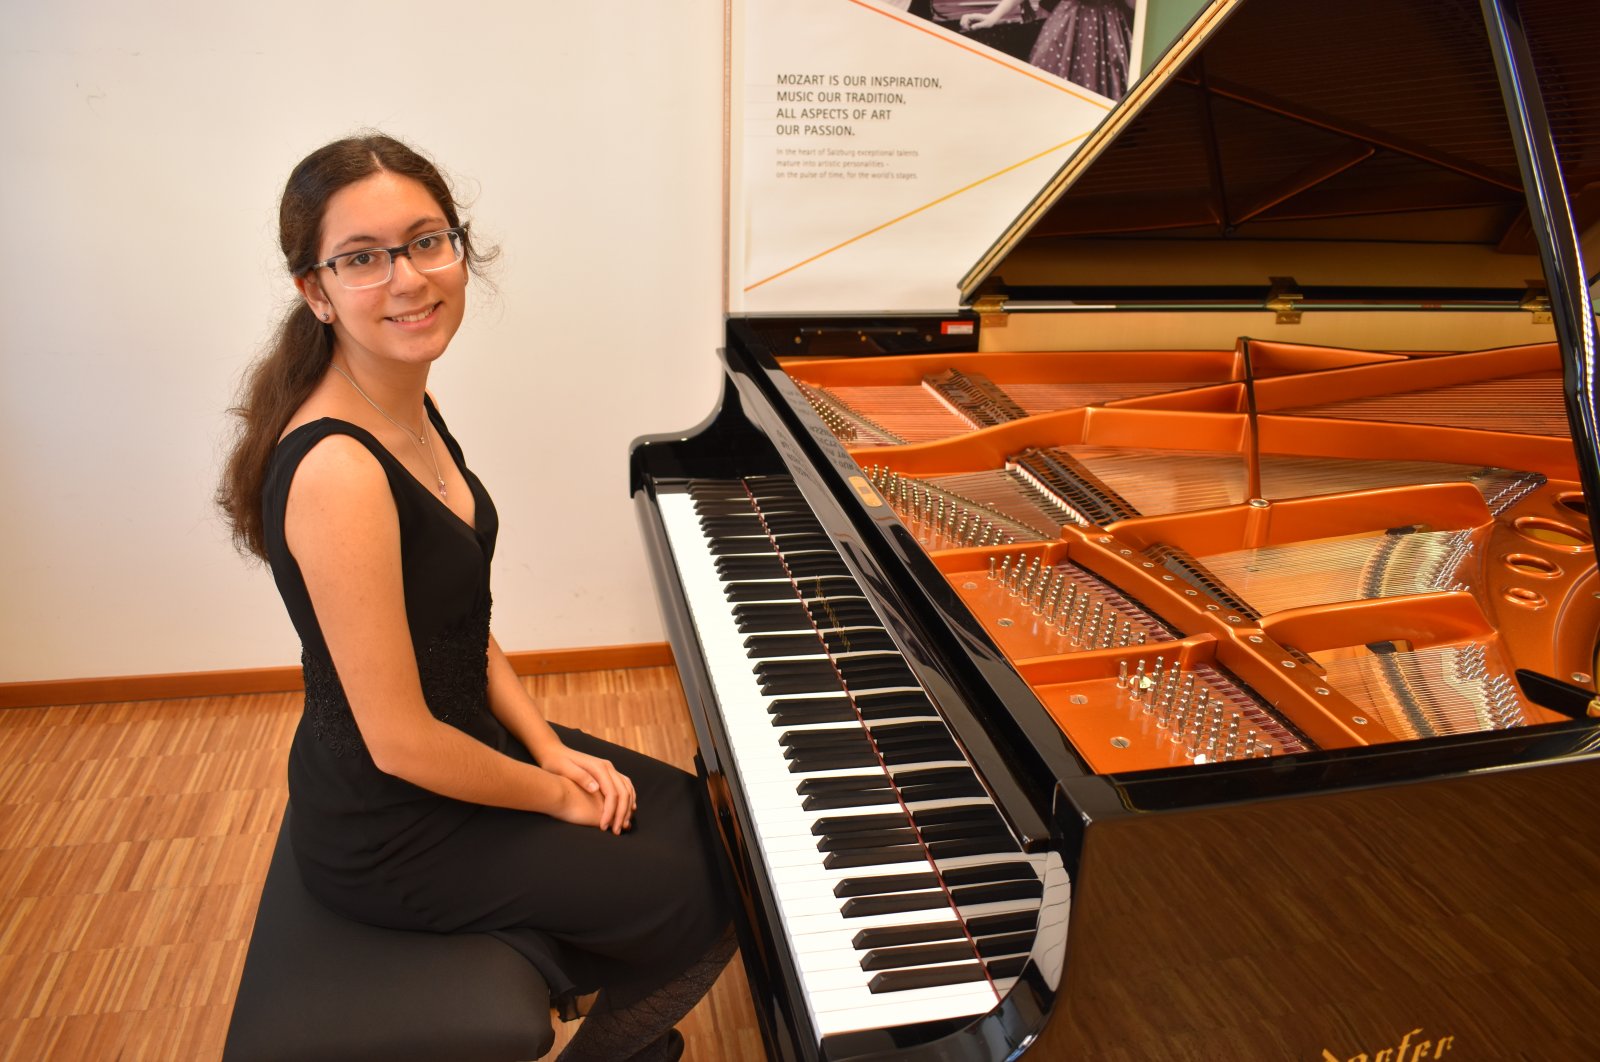 Fifteen-year-old Turkish pianist Ayşe Cemre Ağırgöl poses with her piano.